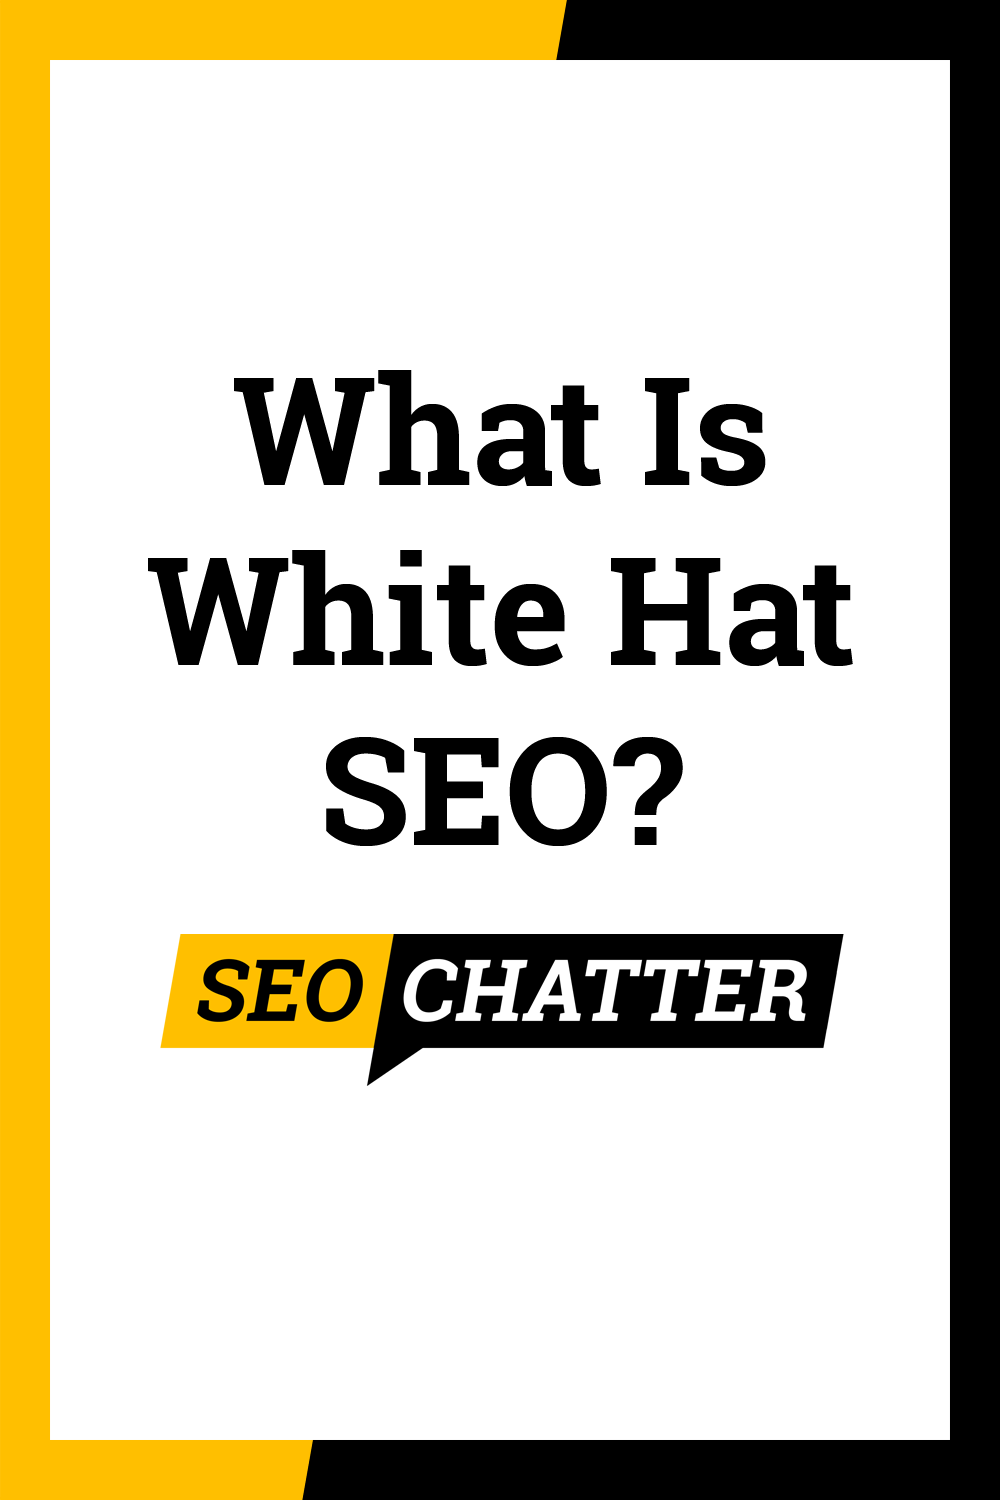 White hat SEO meaning